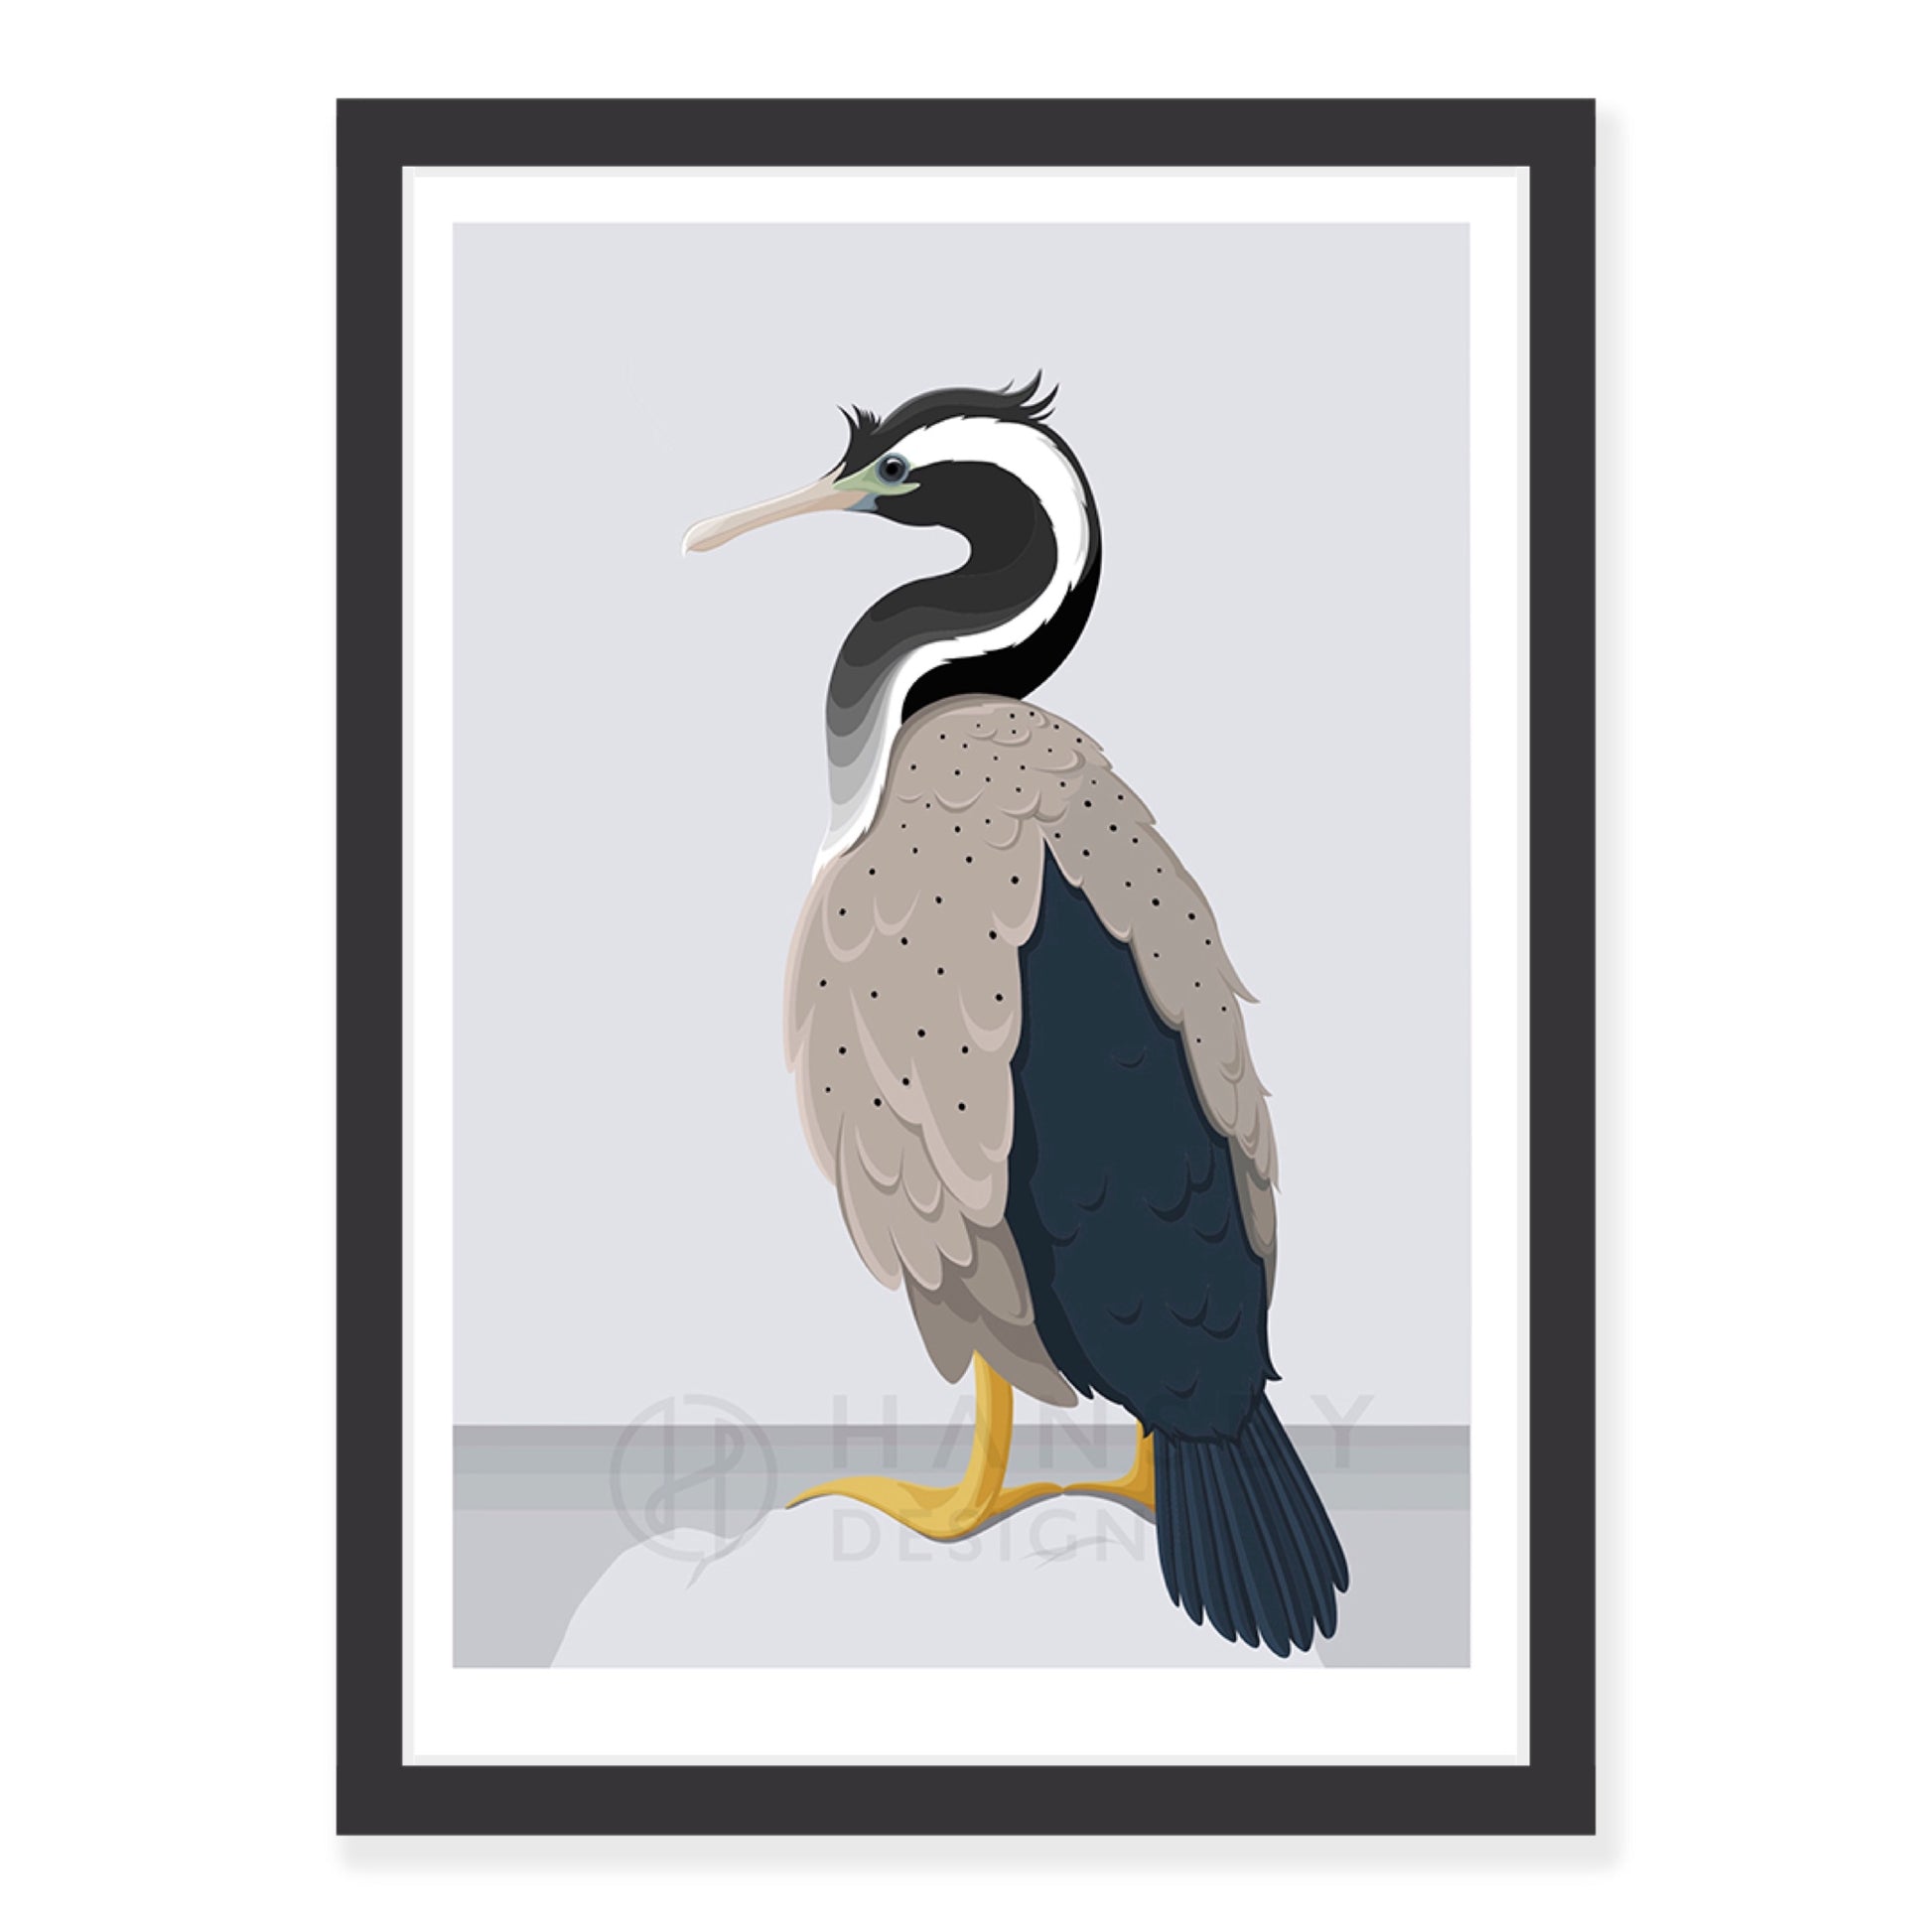 Spotted Shag art print in black frame, by NZ artist Hansby Design